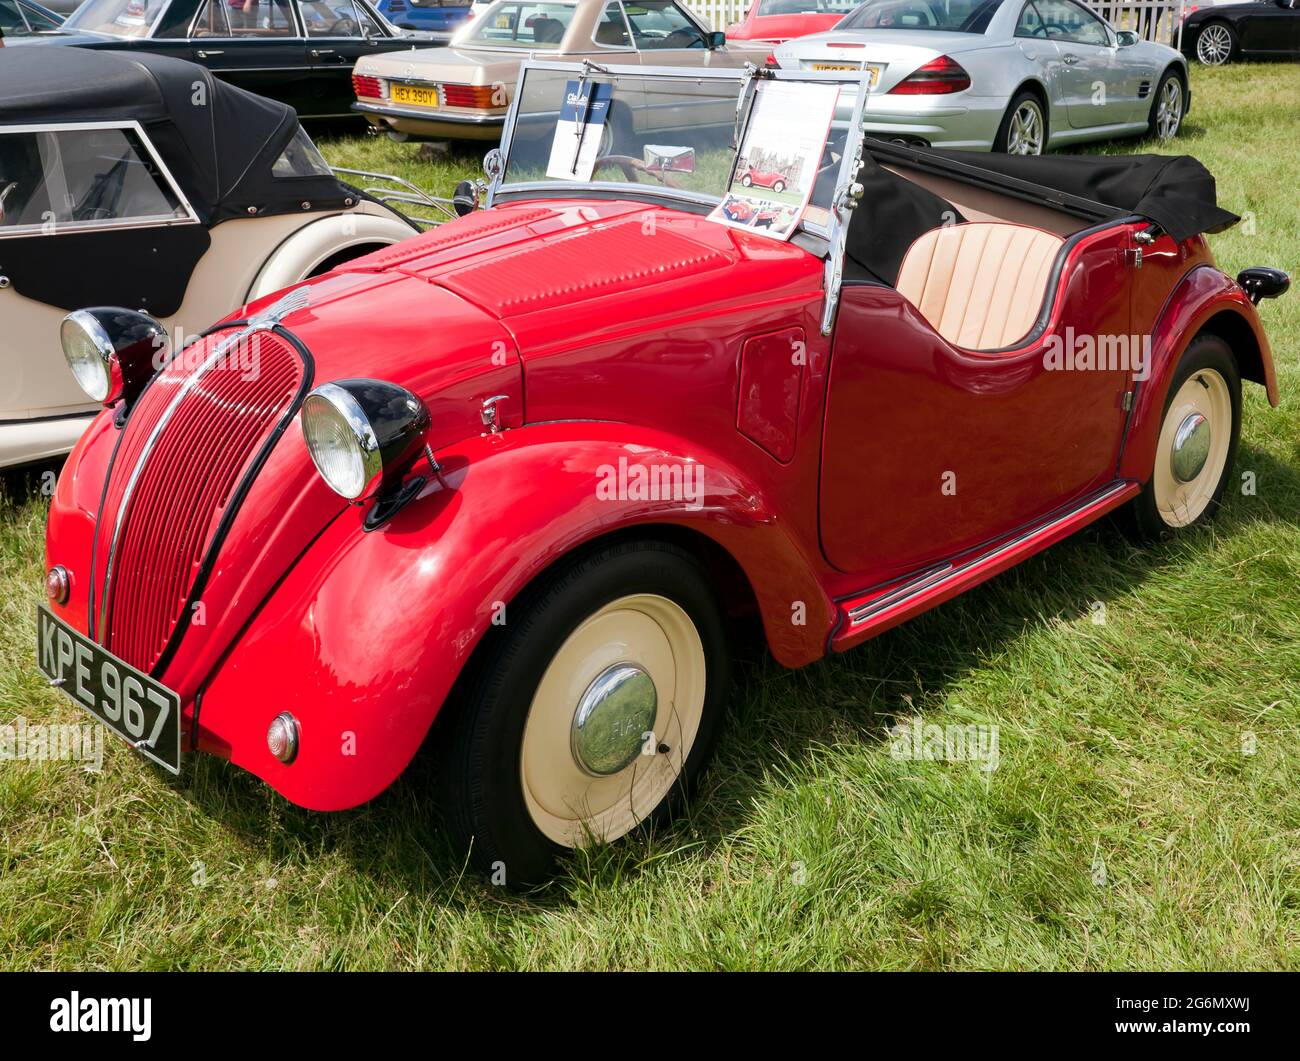 View of a Red,  1938 Fiat 500 Topolino Smith Special, for auction, at the 2021 London Classic Car Show Stock Photo